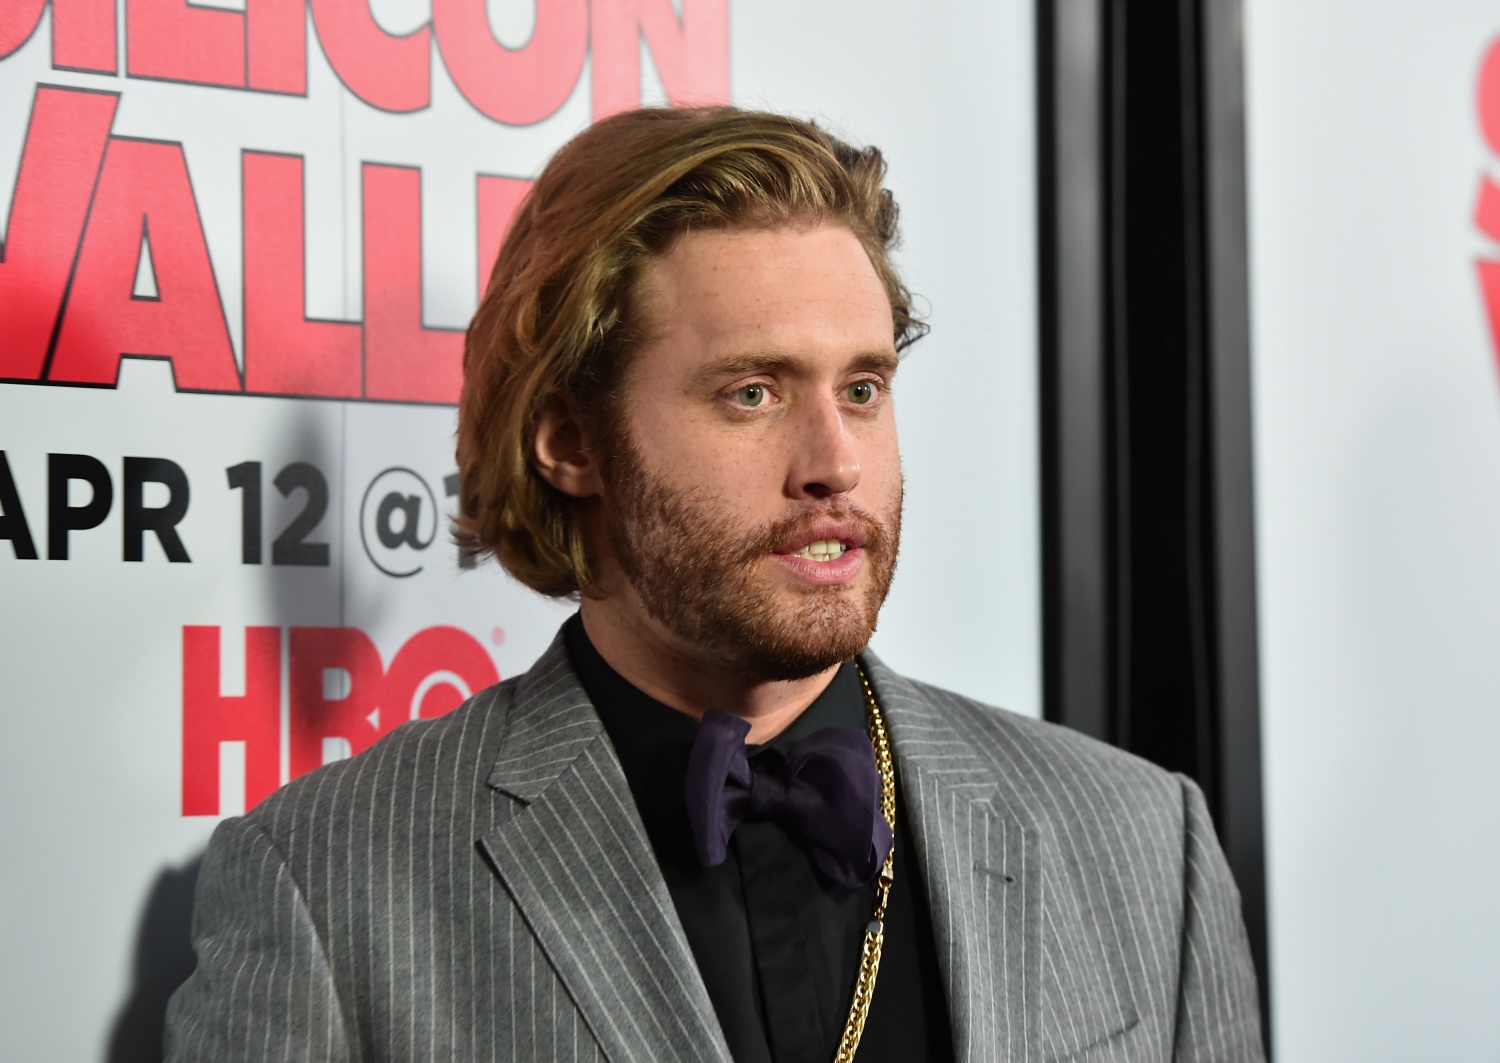 Actor T.J. Miller attends the premiere of HBO's "Silicon Valley" 2nd Season at the El Capitan Theatre on April 2, 2015 in Hollywood, California. (Photo by Alberto E. Rodriguez/Getty Images)